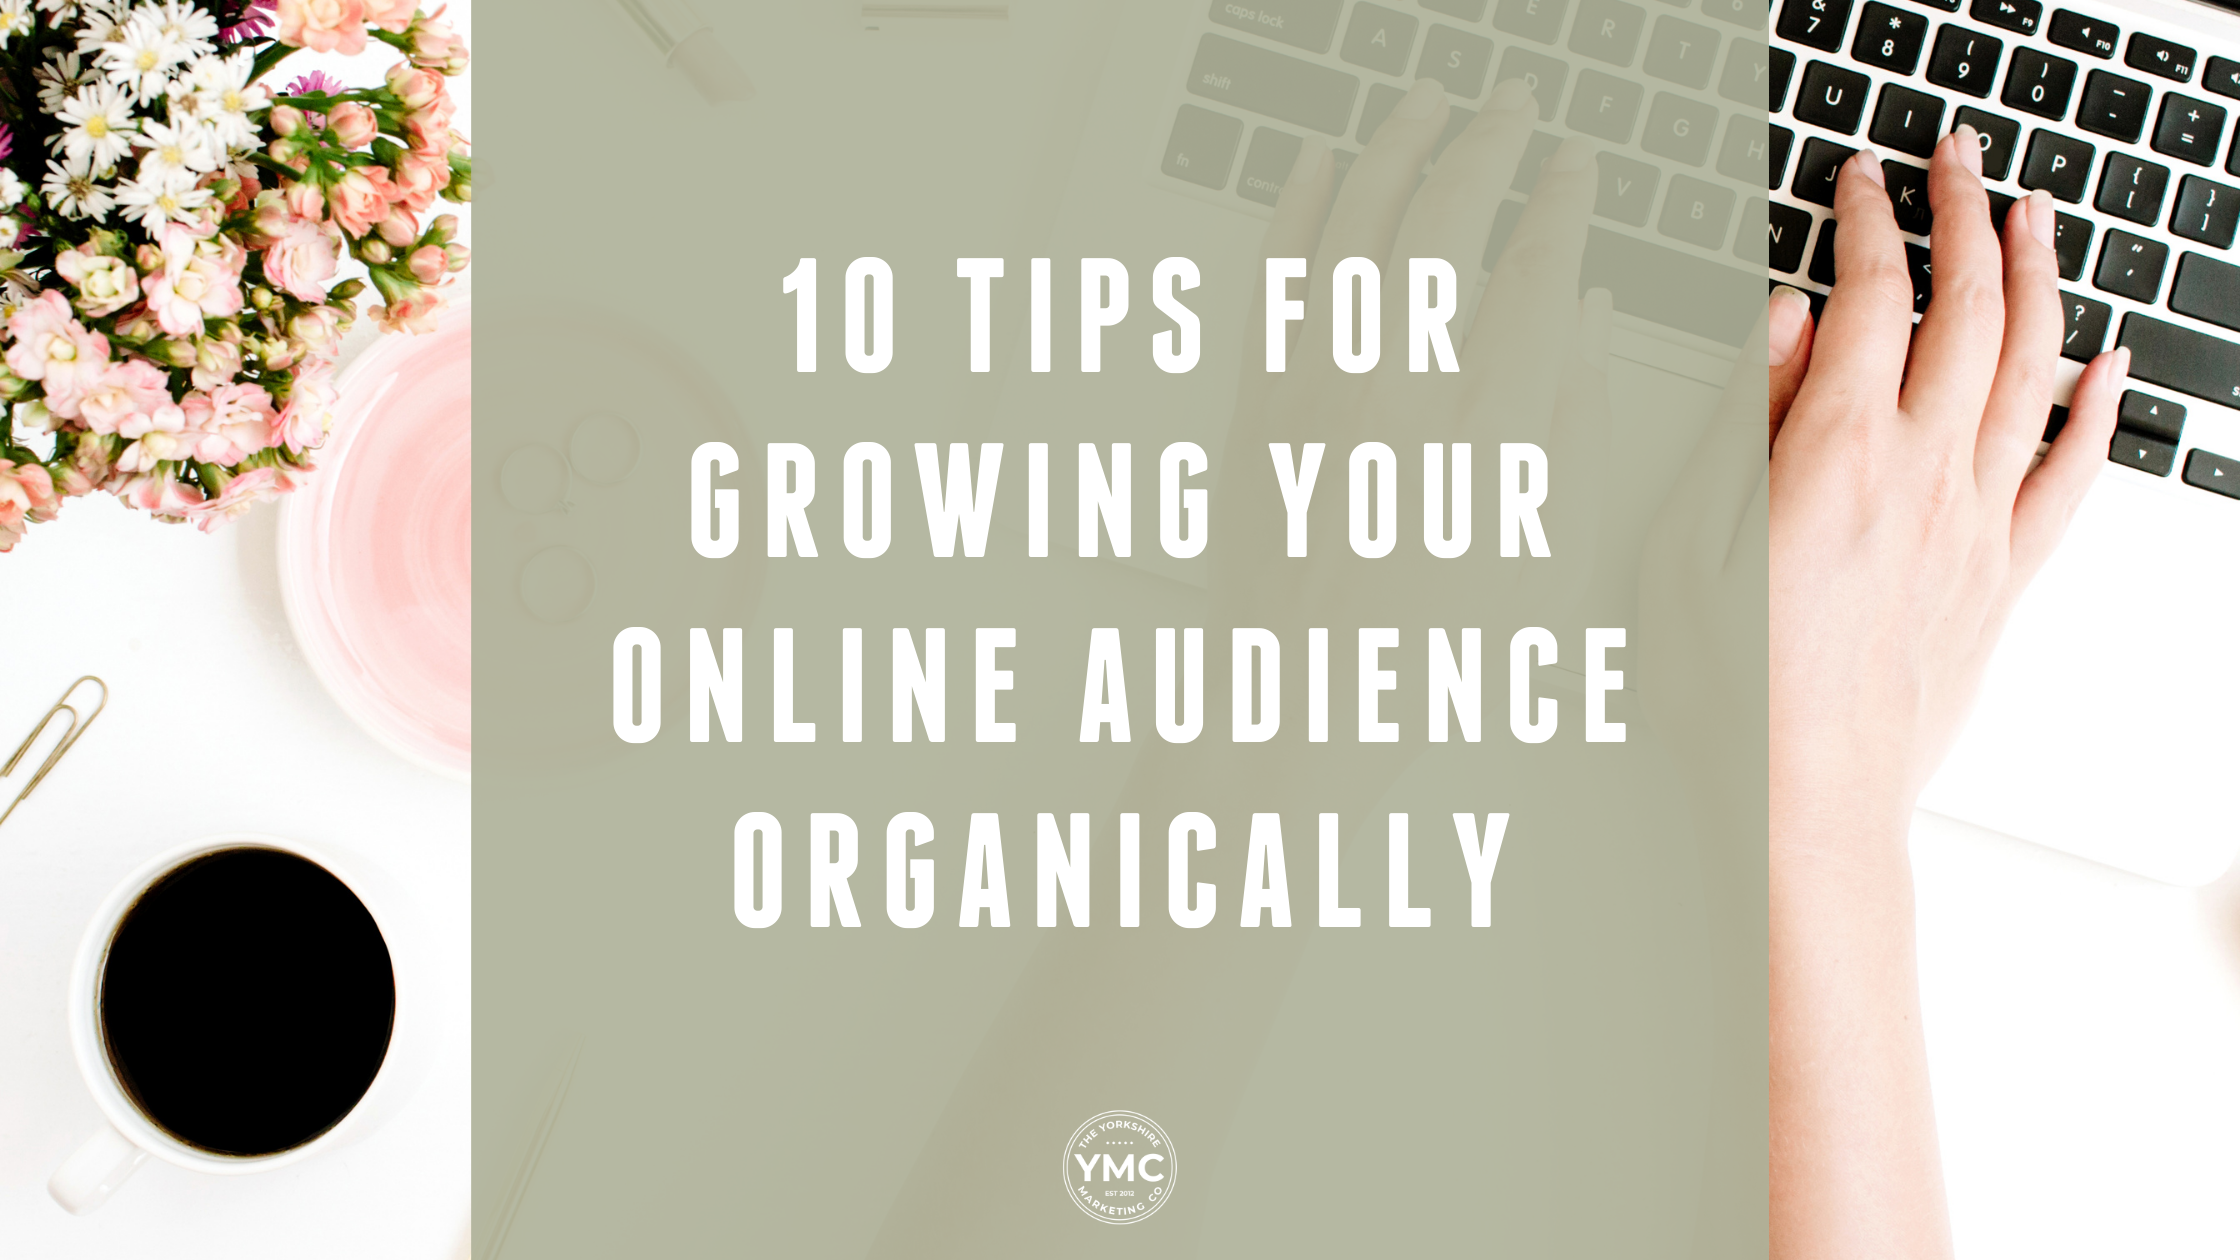 10 Tips For Growing Your Online Audience Organically